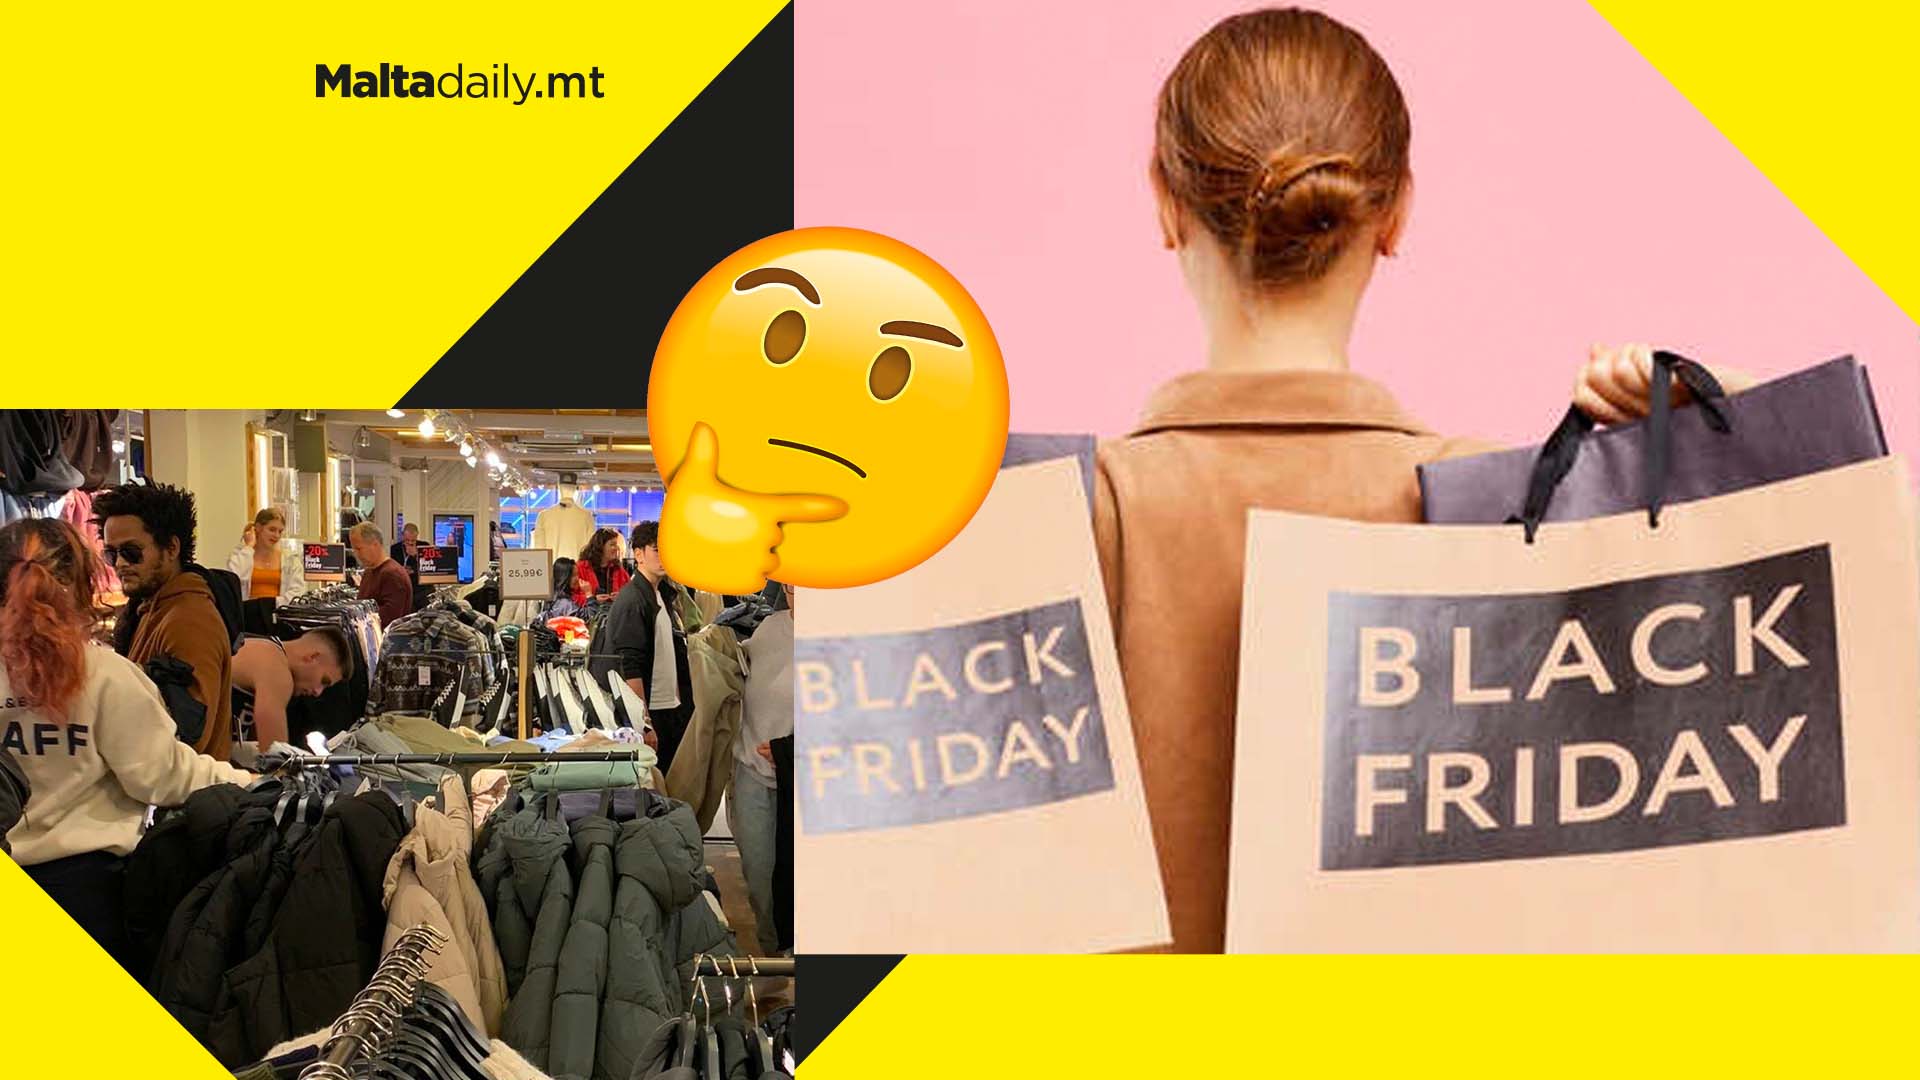 More Black Friday consumers but less spending reveal SMEs